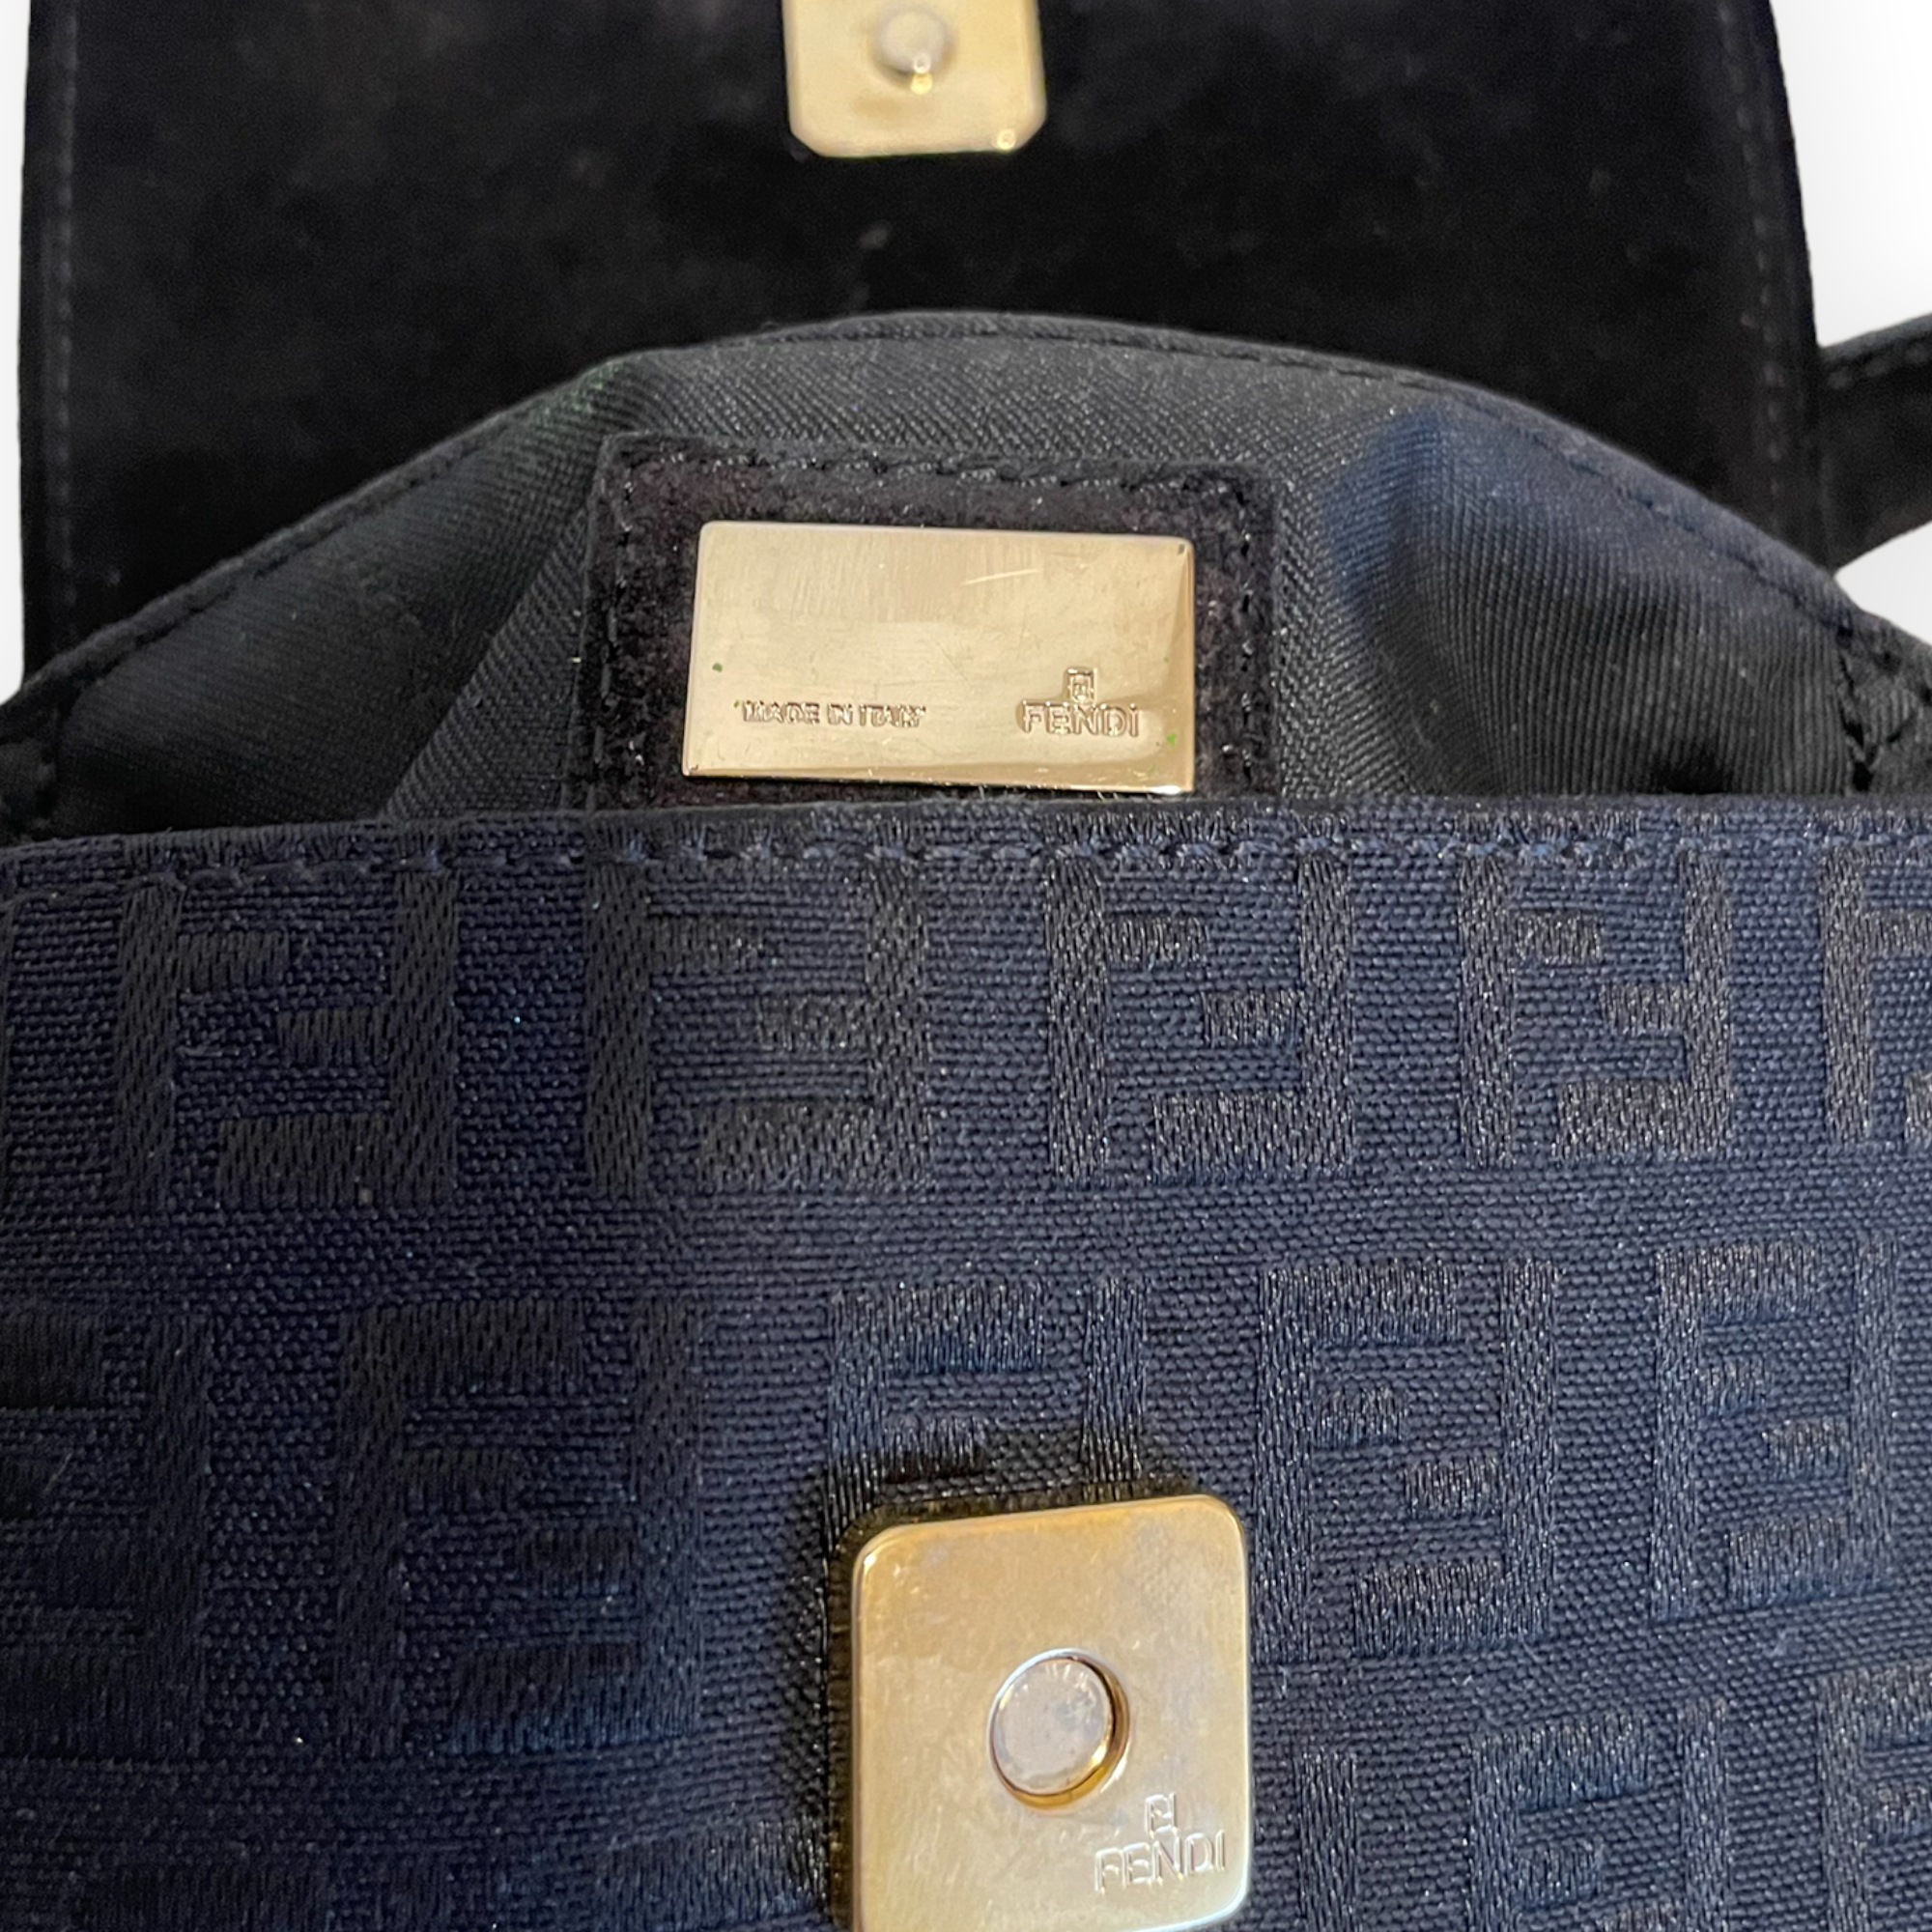 Extremely RARE Vintage FENDI Purse with STUNNING Gold Tone Metal FF logo Accents